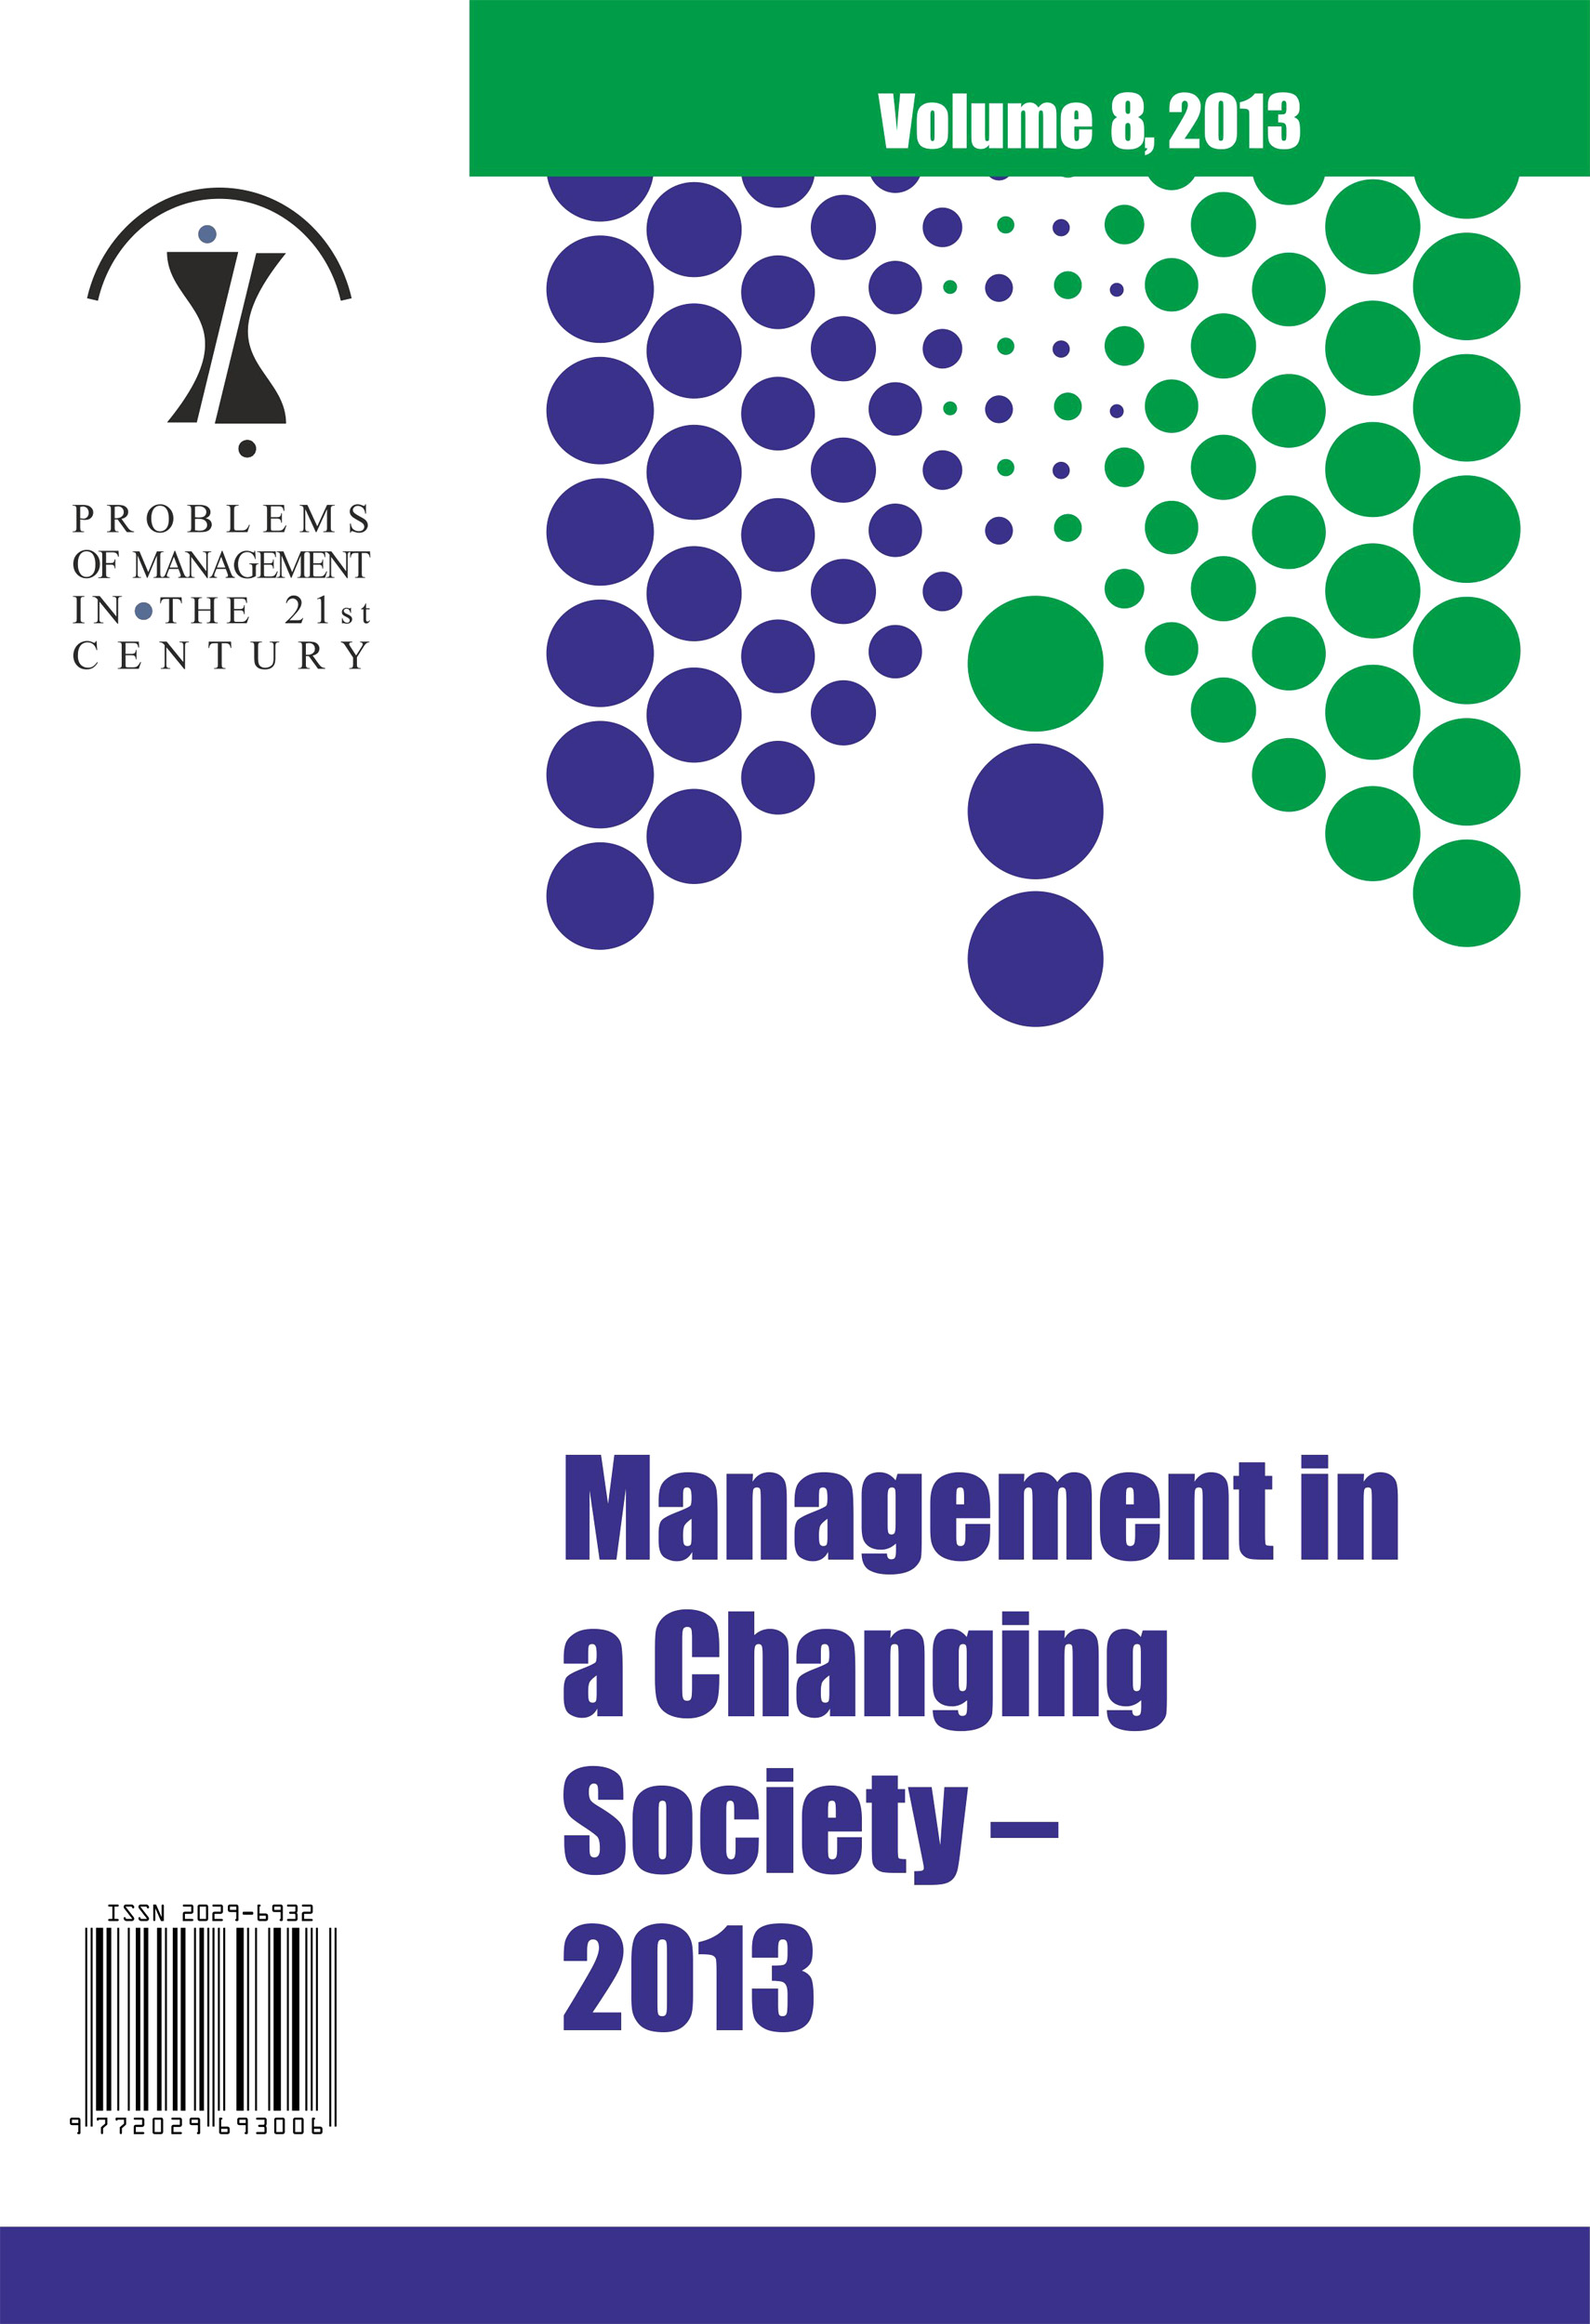 RELATIONS BETWEEN ORGANIZATIONAL EFFECTIVENESS AND EFFICIENCY IN PUBLIC SECTOR UNITS